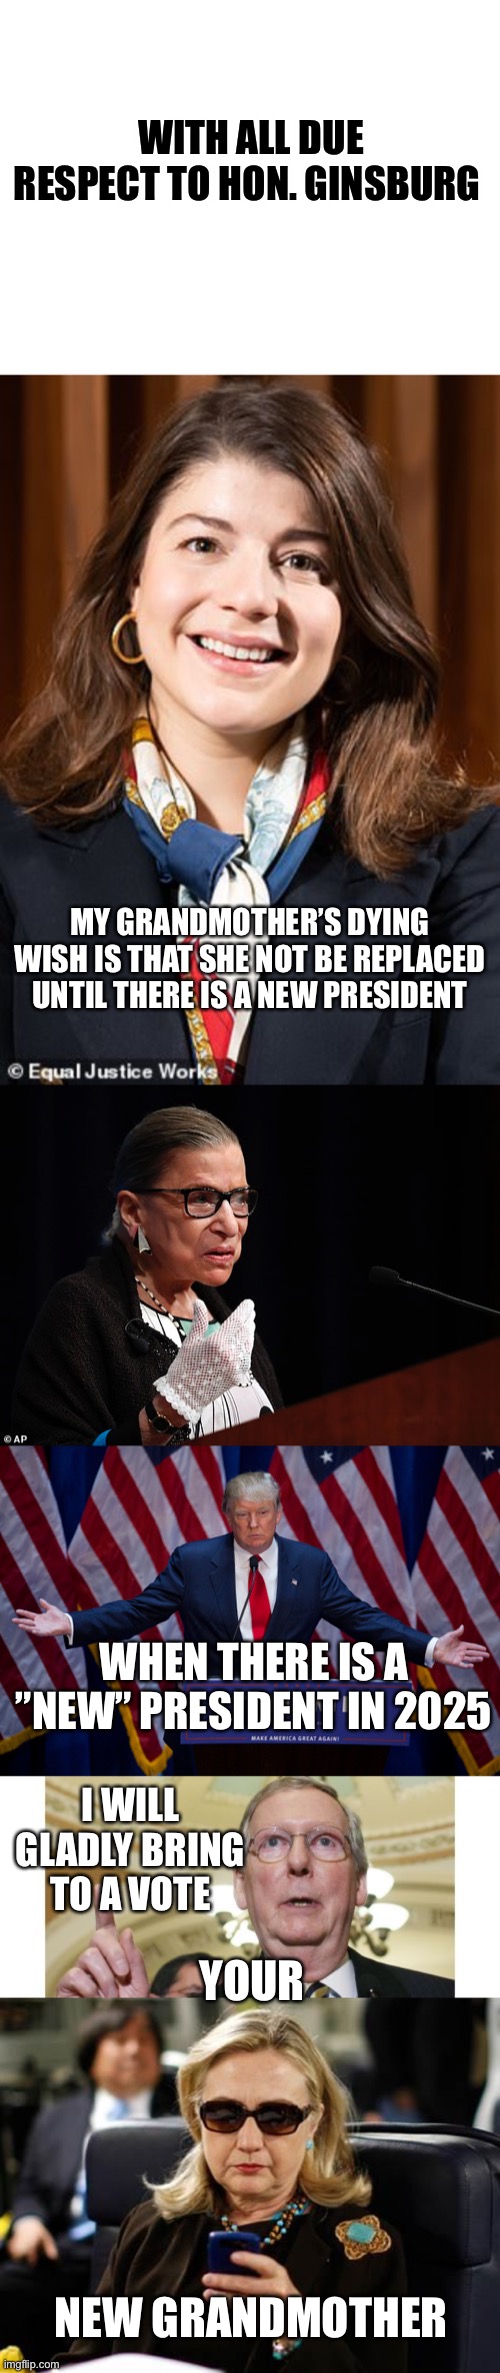 Be careful what you ask for and how you word it | WITH ALL DUE RESPECT TO HON. GINSBURG; MY GRANDMOTHER’S DYING WISH IS THAT SHE NOT BE REPLACED UNTIL THERE IS A NEW PRESIDENT; WHEN THERE IS A ”NEW” PRESIDENT IN 2025; I WILL GLADLY BRING TO A VOTE; YOUR; NEW GRANDMOTHER | image tagged in memes,mitch mcconnell,hillary clinton cellphone,donald trump,rbg,grandmother | made w/ Imgflip meme maker